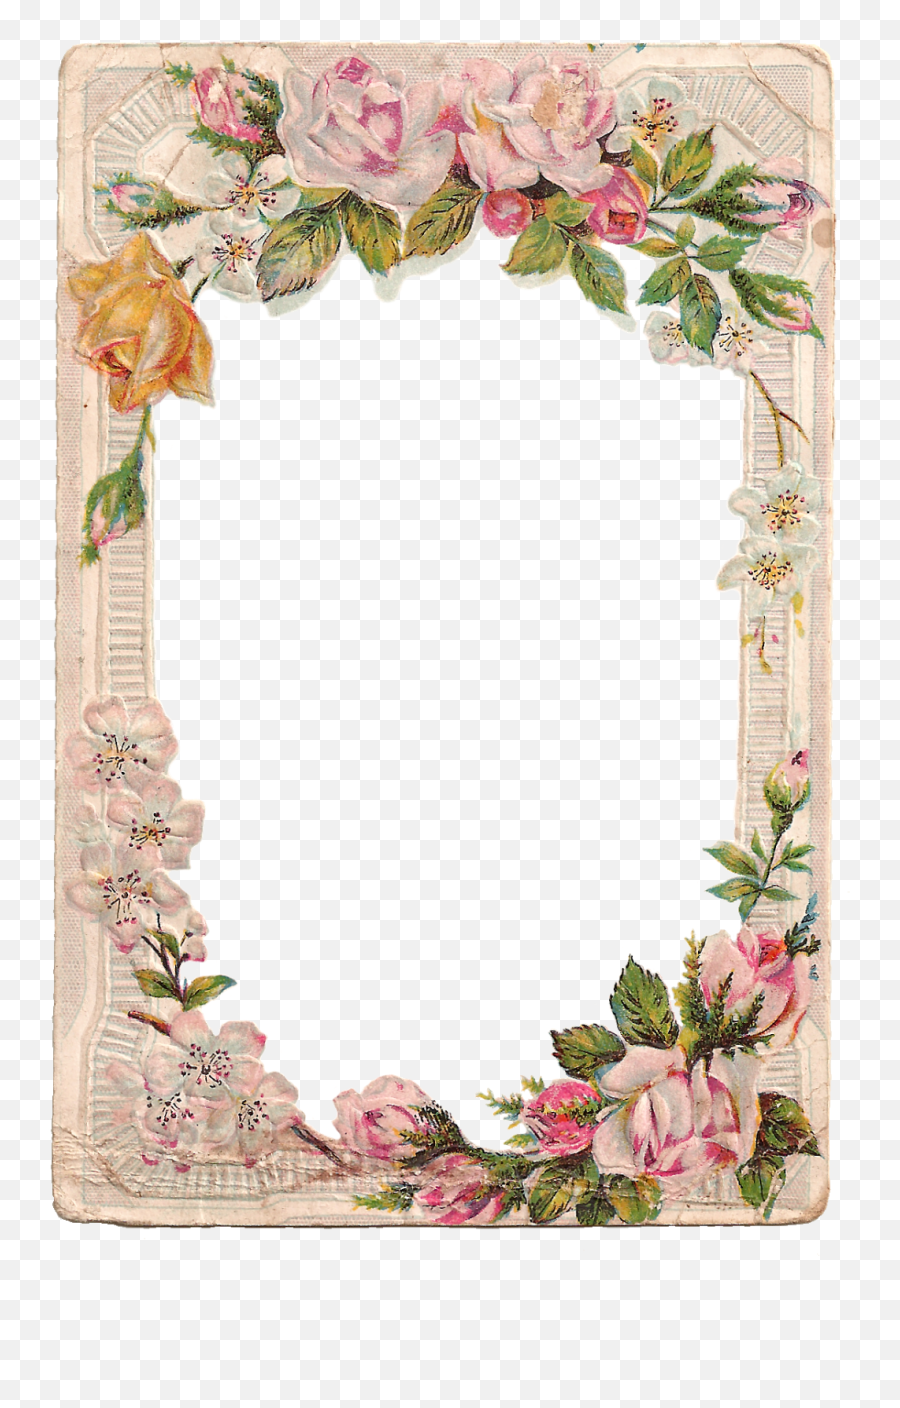 Help Your Garden Grow With These Simple Tips Flower Frame - Flower Design Borders And Frames Png,Vintage Picture Frame Png